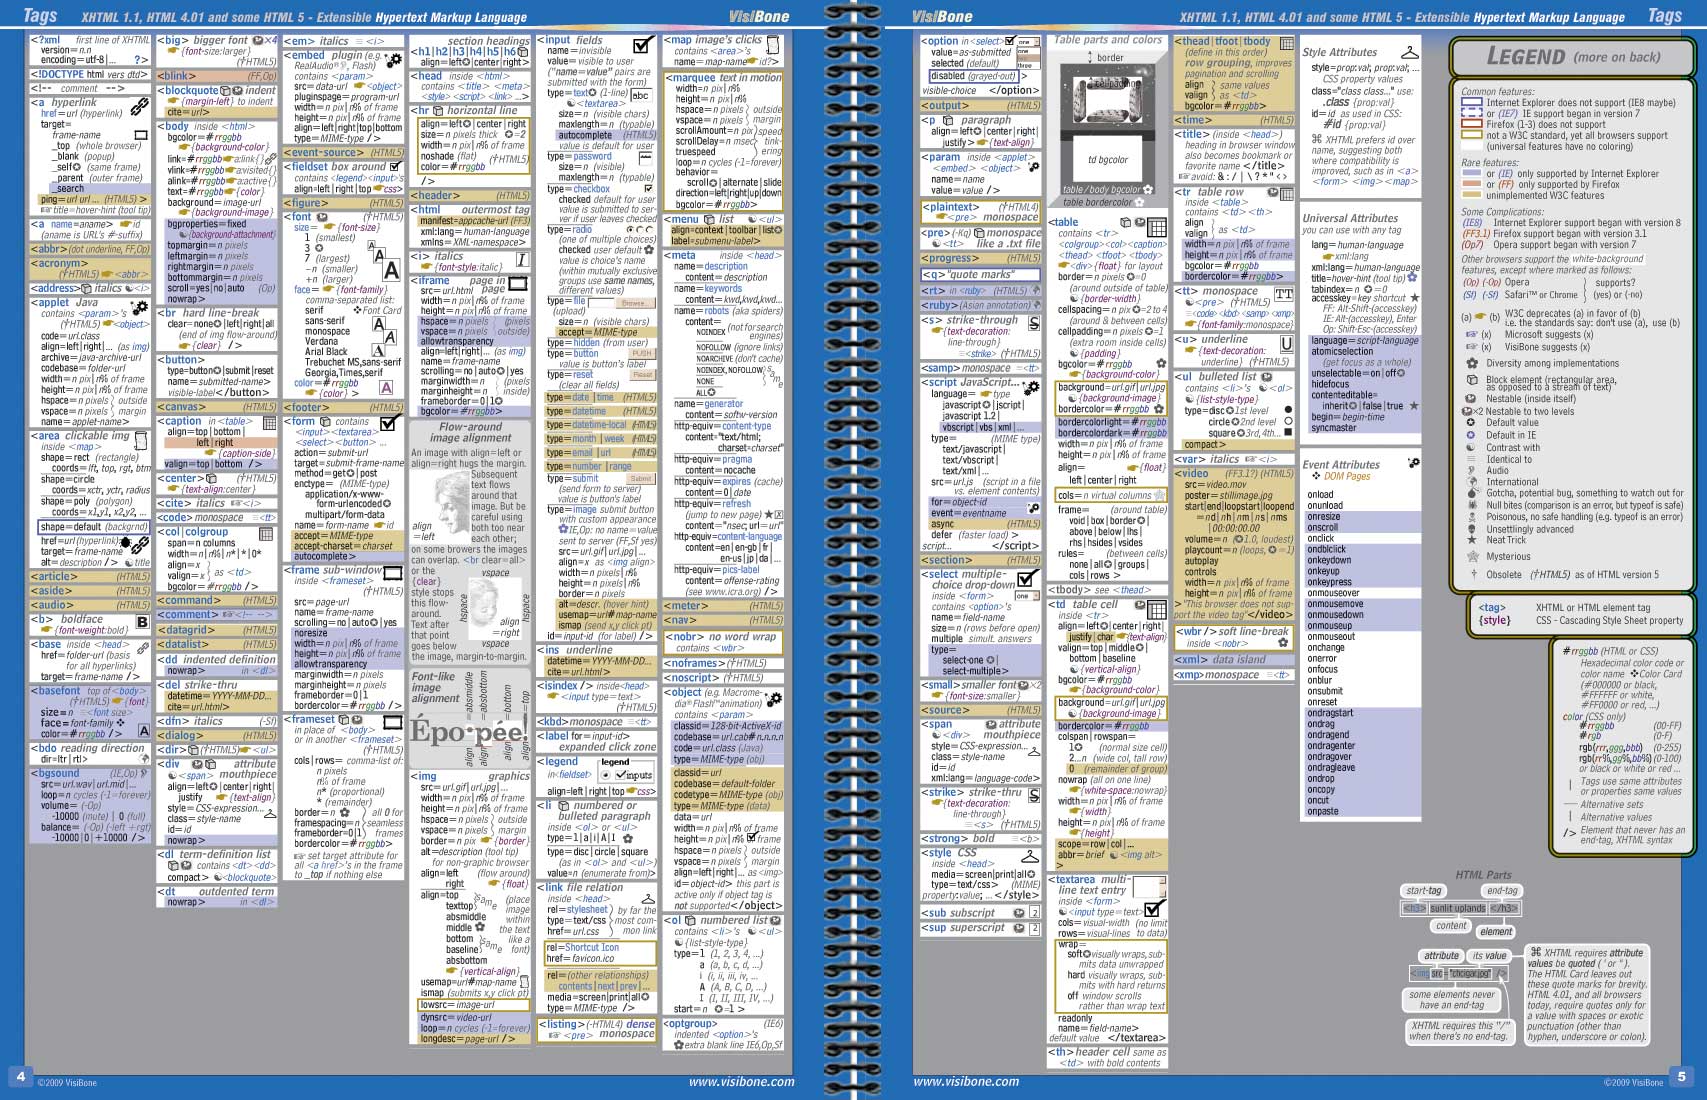 The VisiBone Everything Book Pages 4-5: XHTML Tags